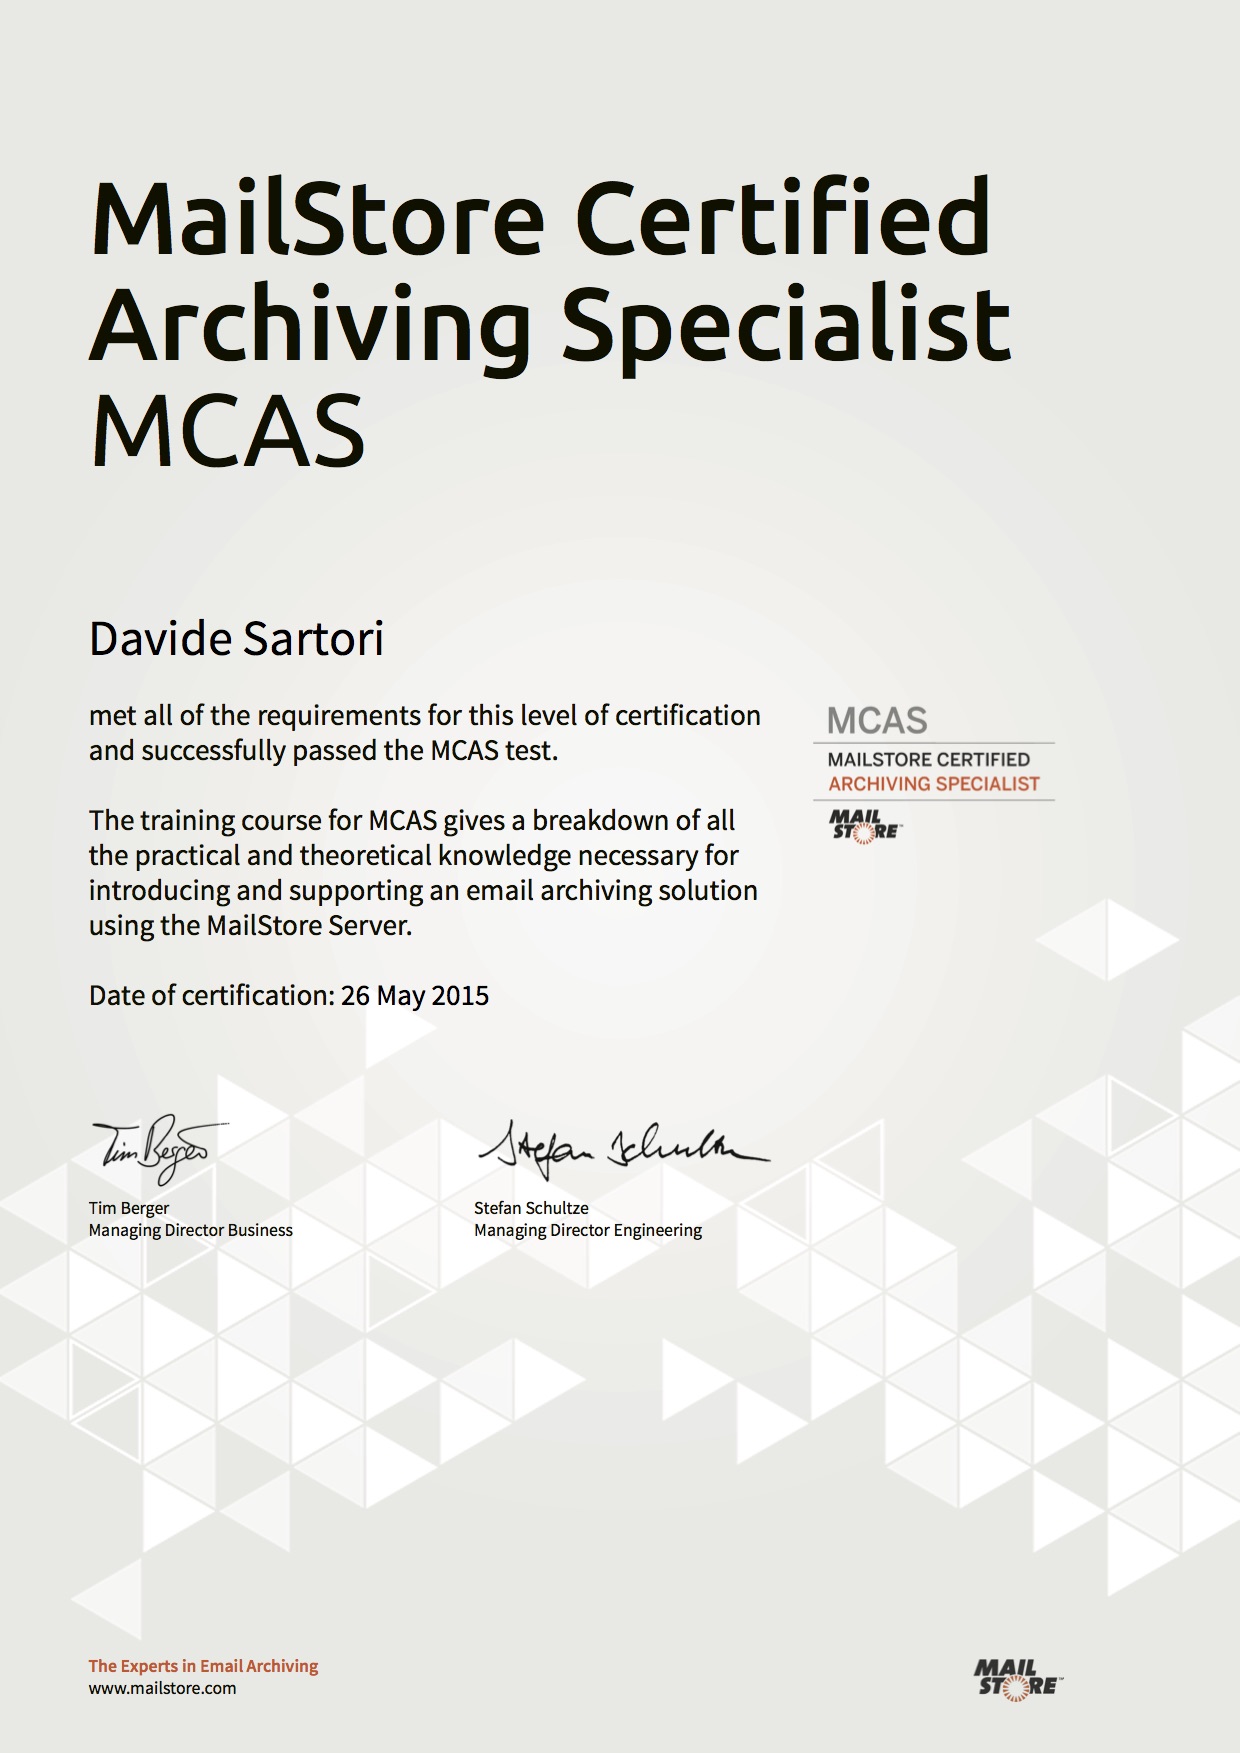 Mailstore Certified Archiving Specialist